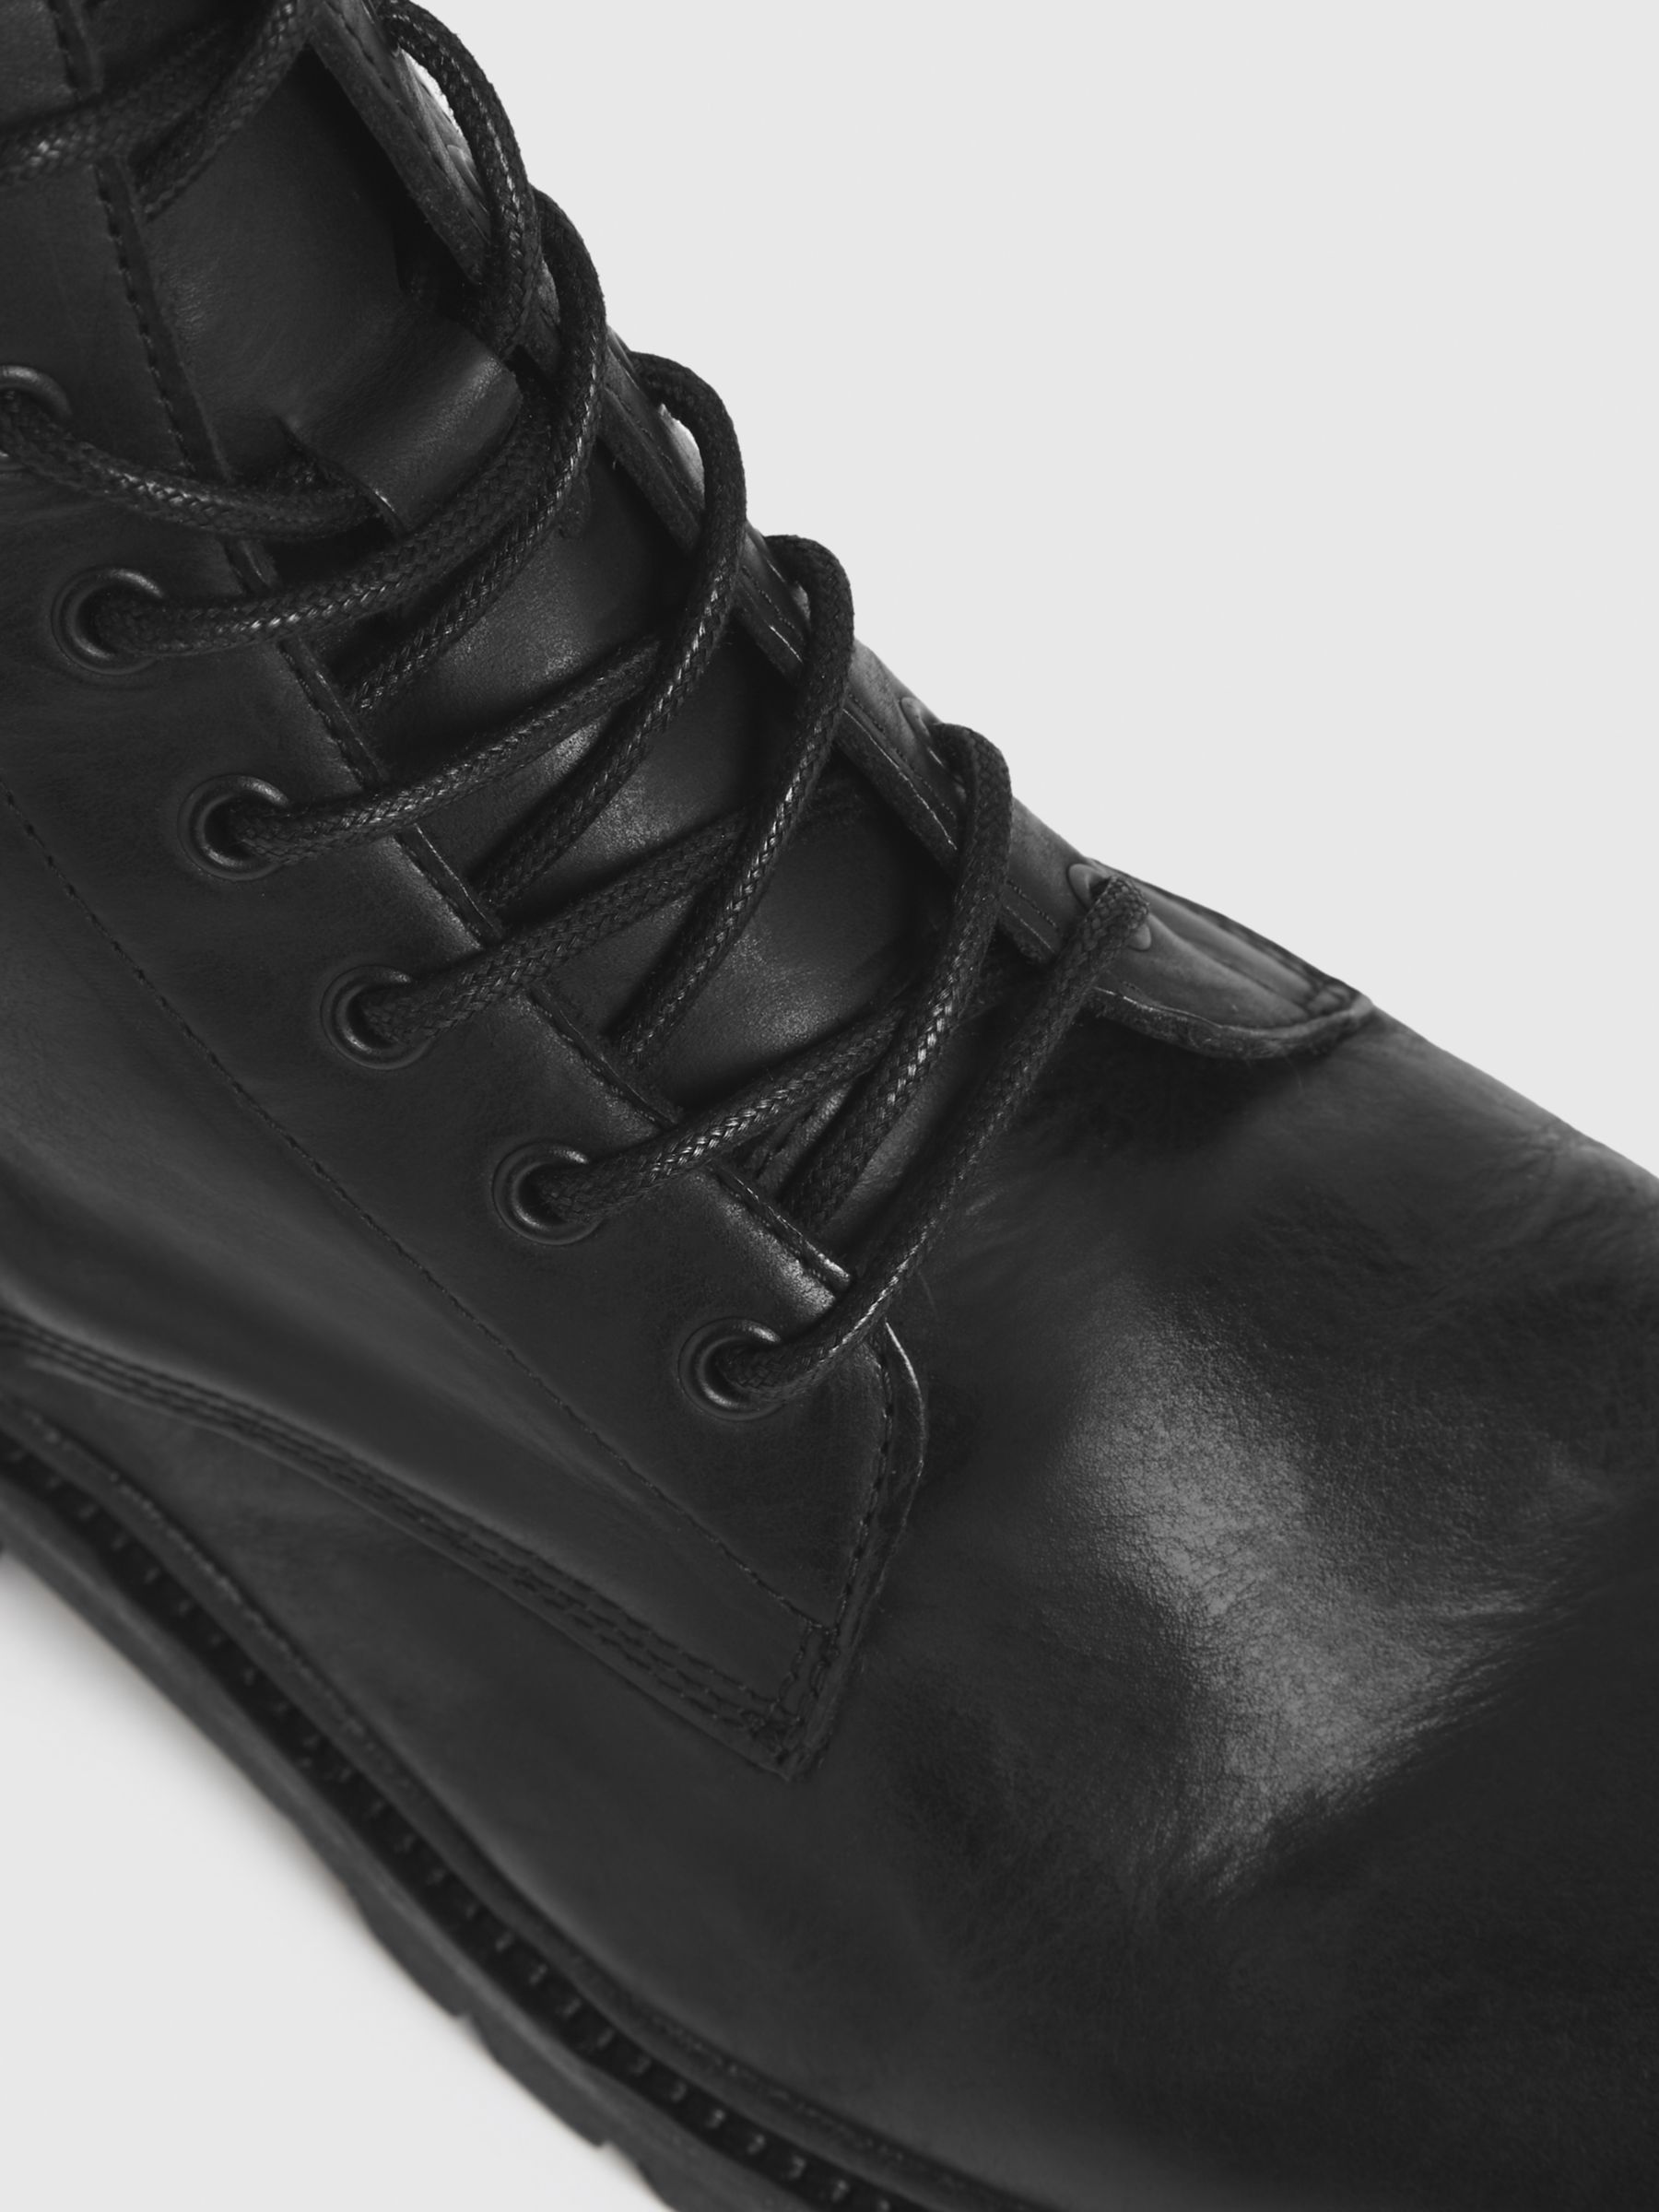 Buy AllSaints Tobias Leather Military Boots, Black Online at johnlewis.com